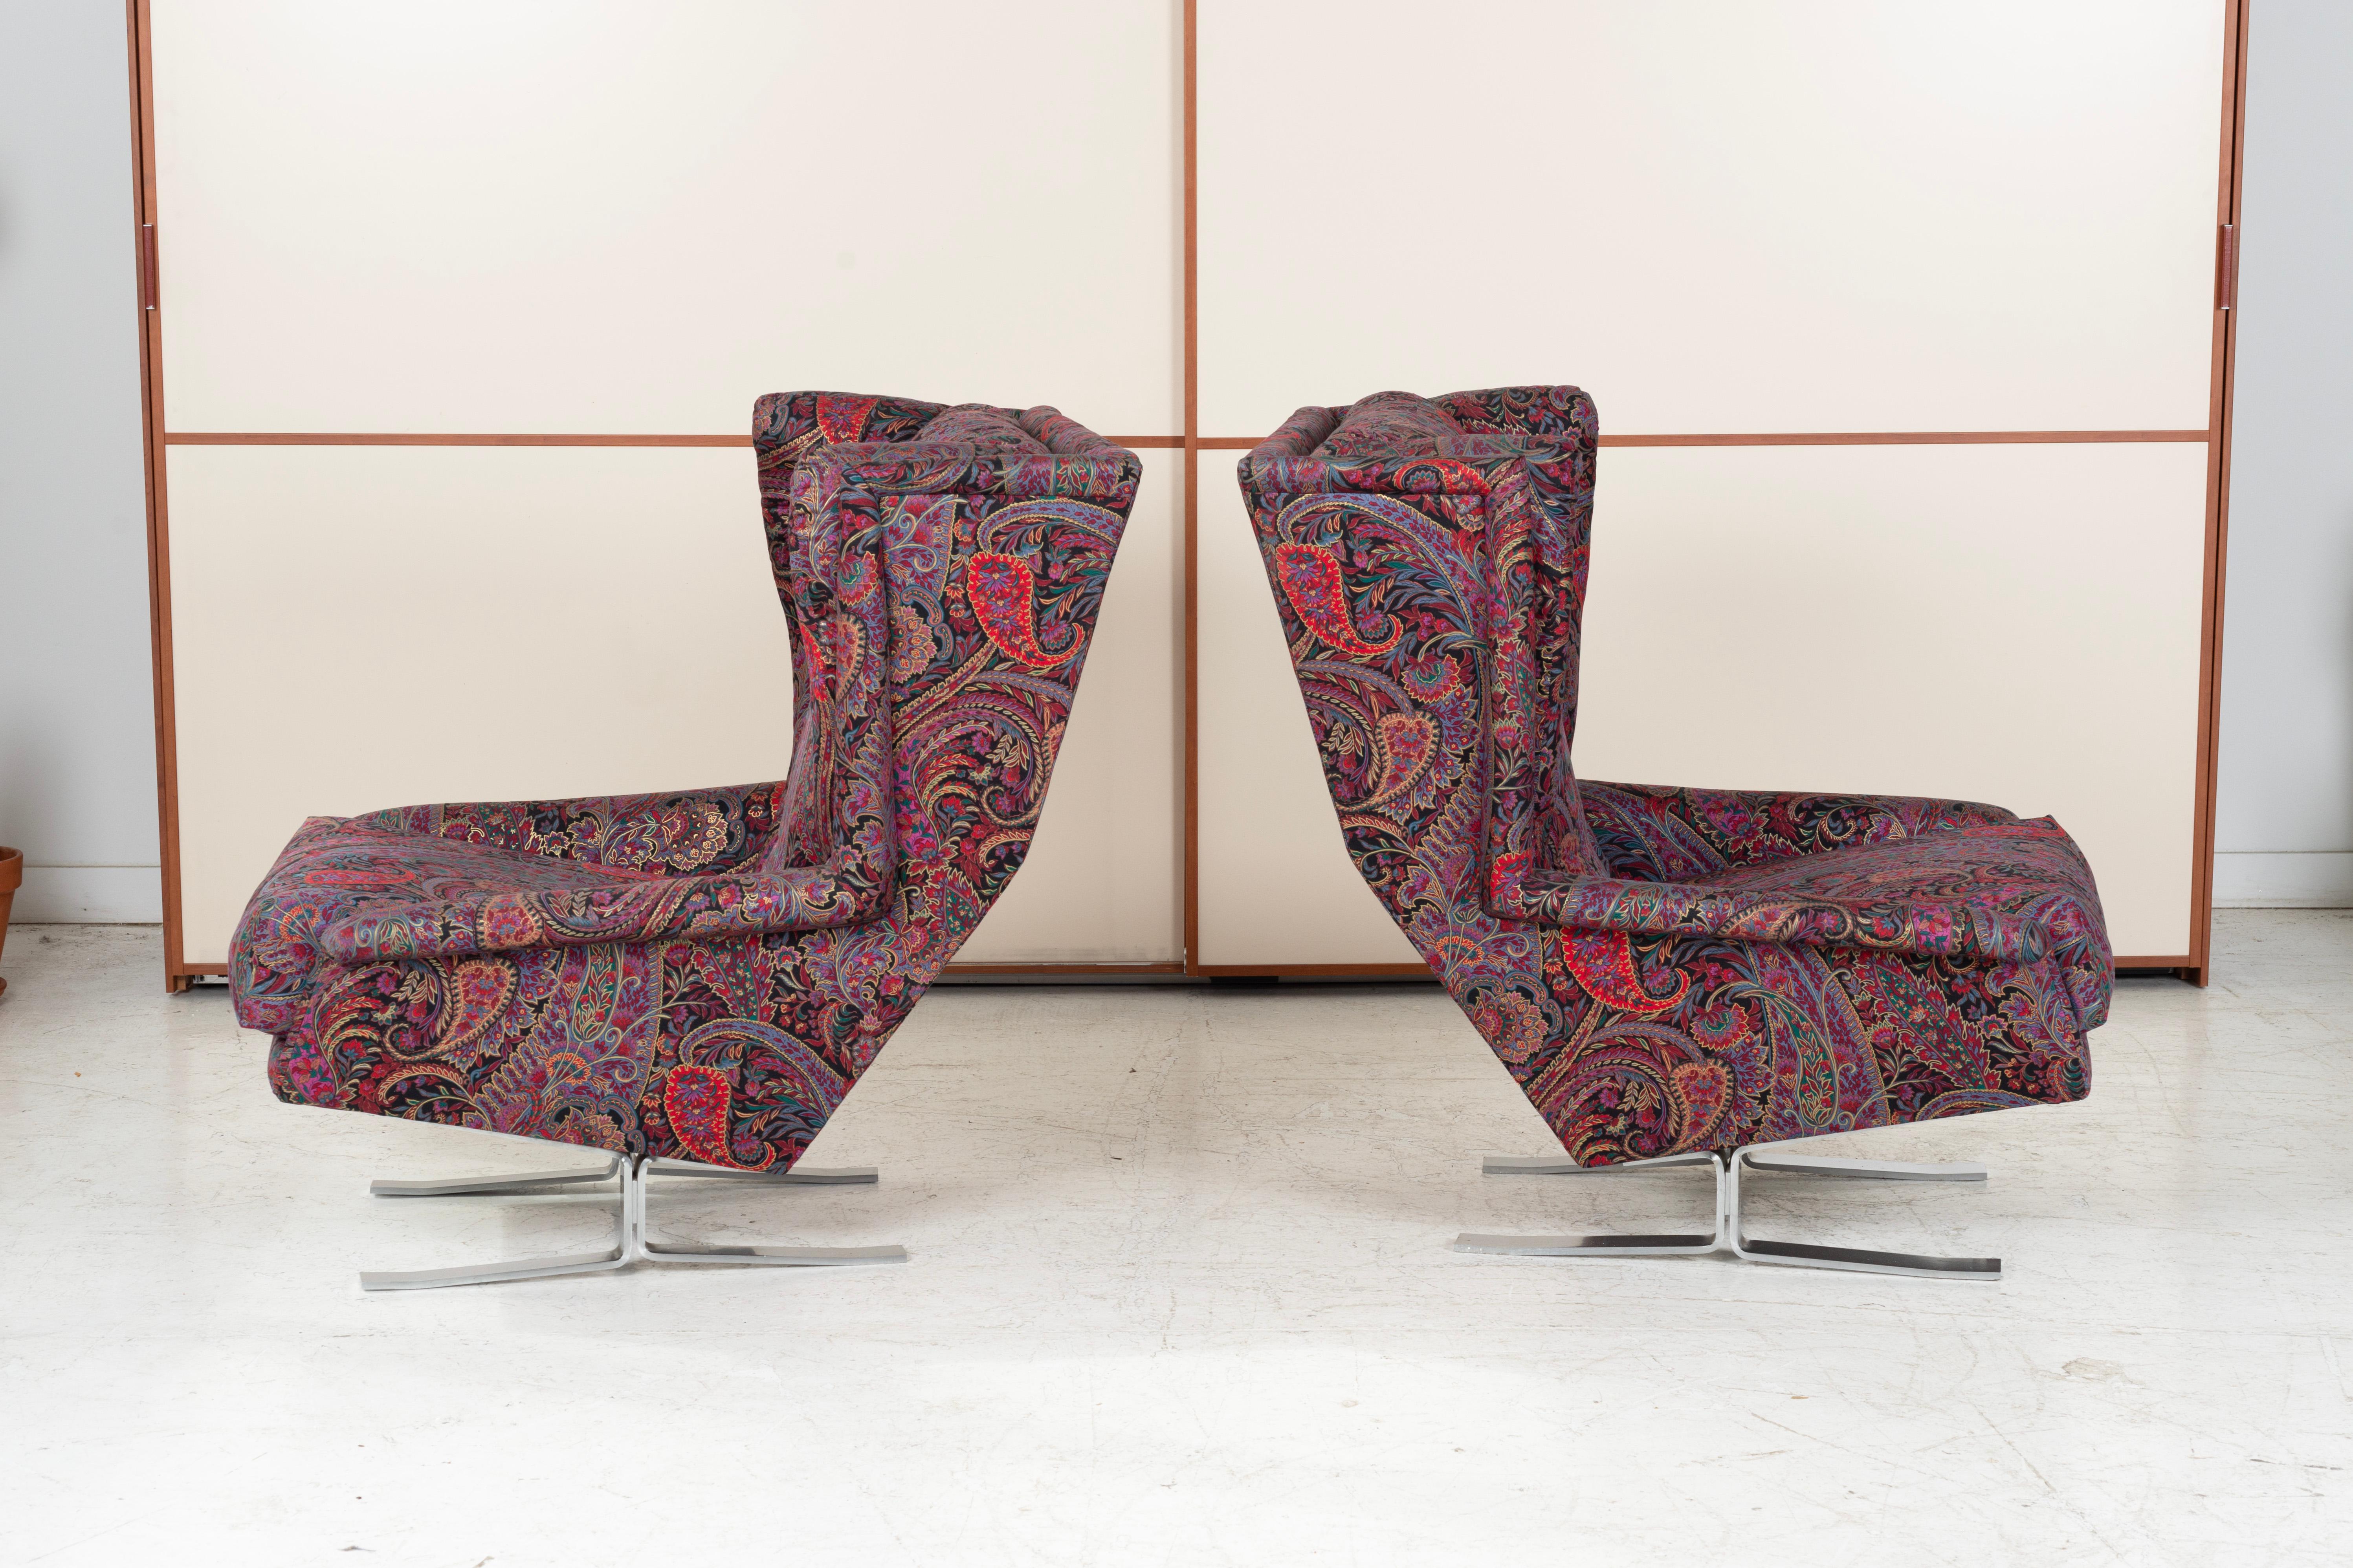 Paar Adrian Pearsall Wingback Lounge Chairs im Zustand „Gut“ im Angebot in Chicago, IL